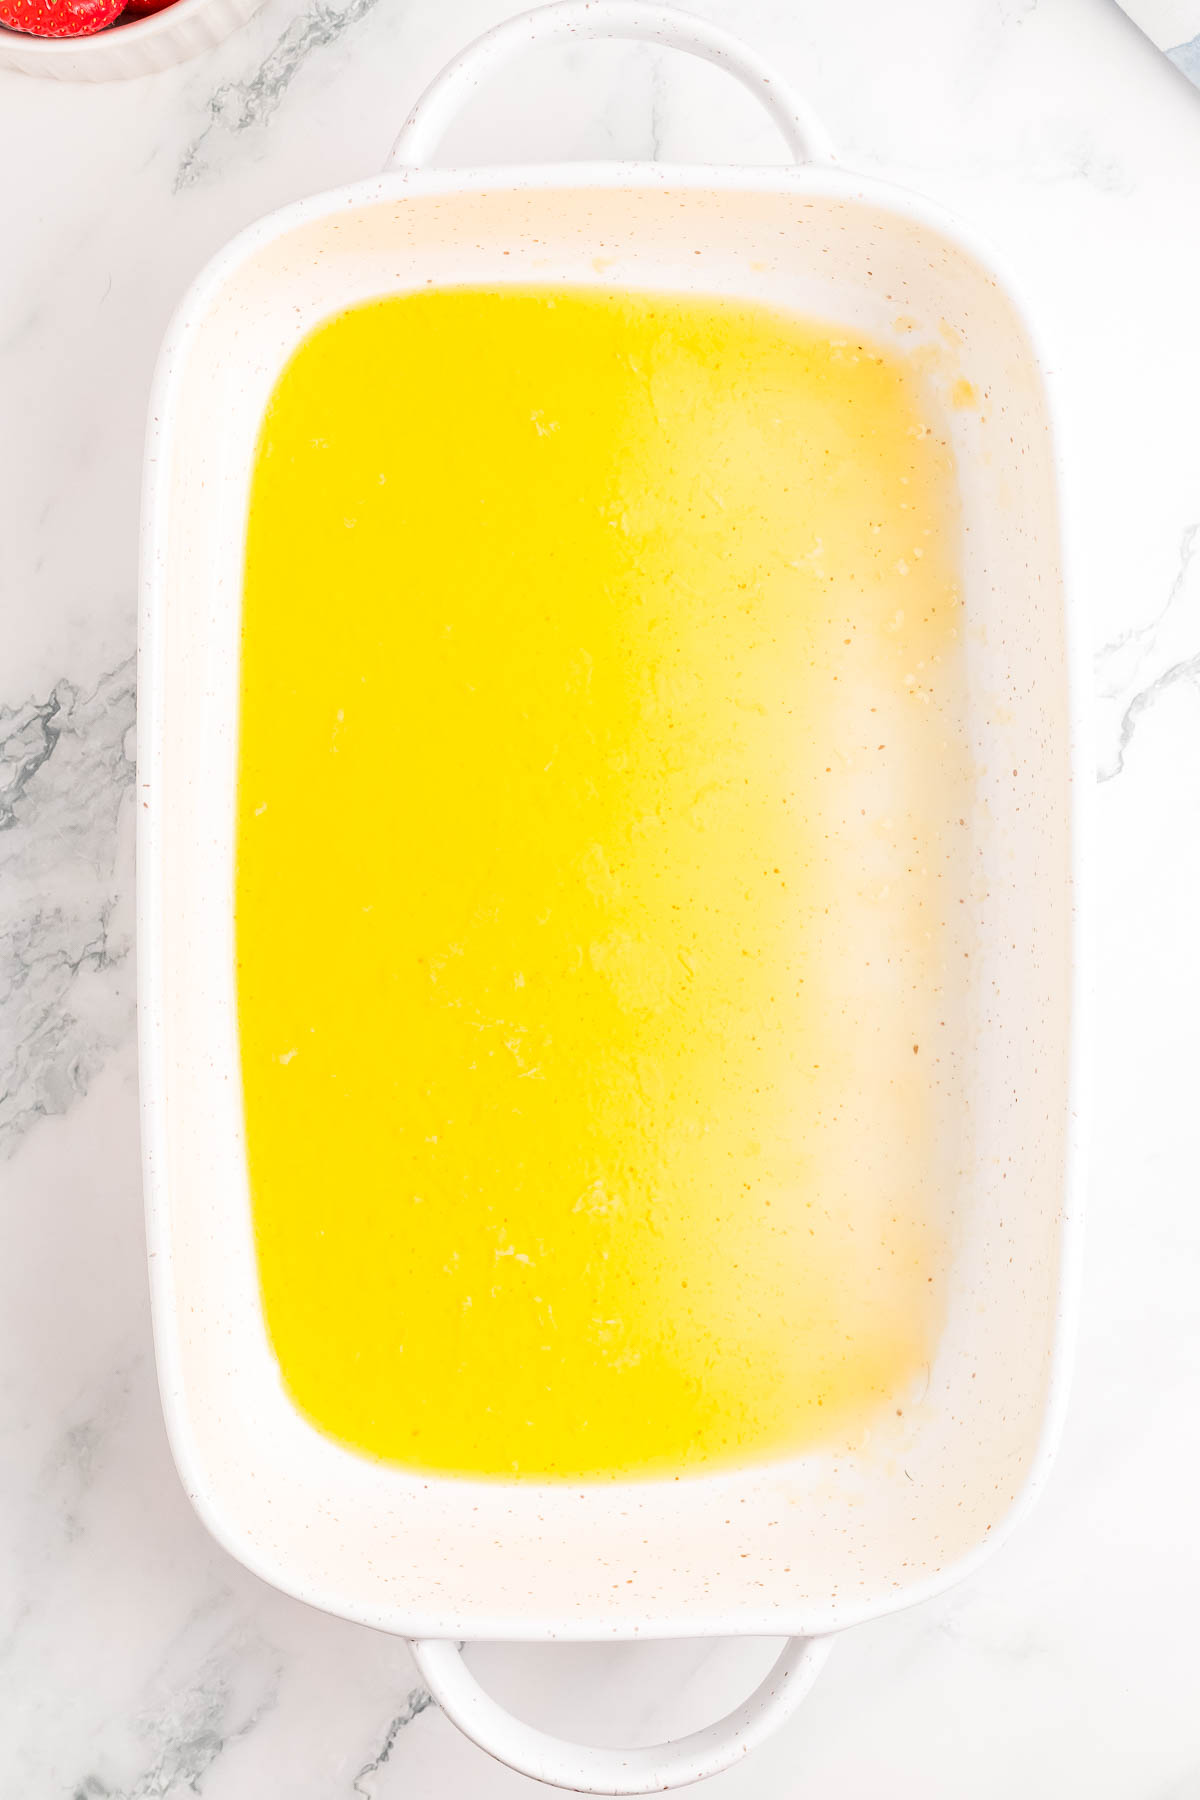 Rectangular white baking dish filled with melted butter on a marble countertop.